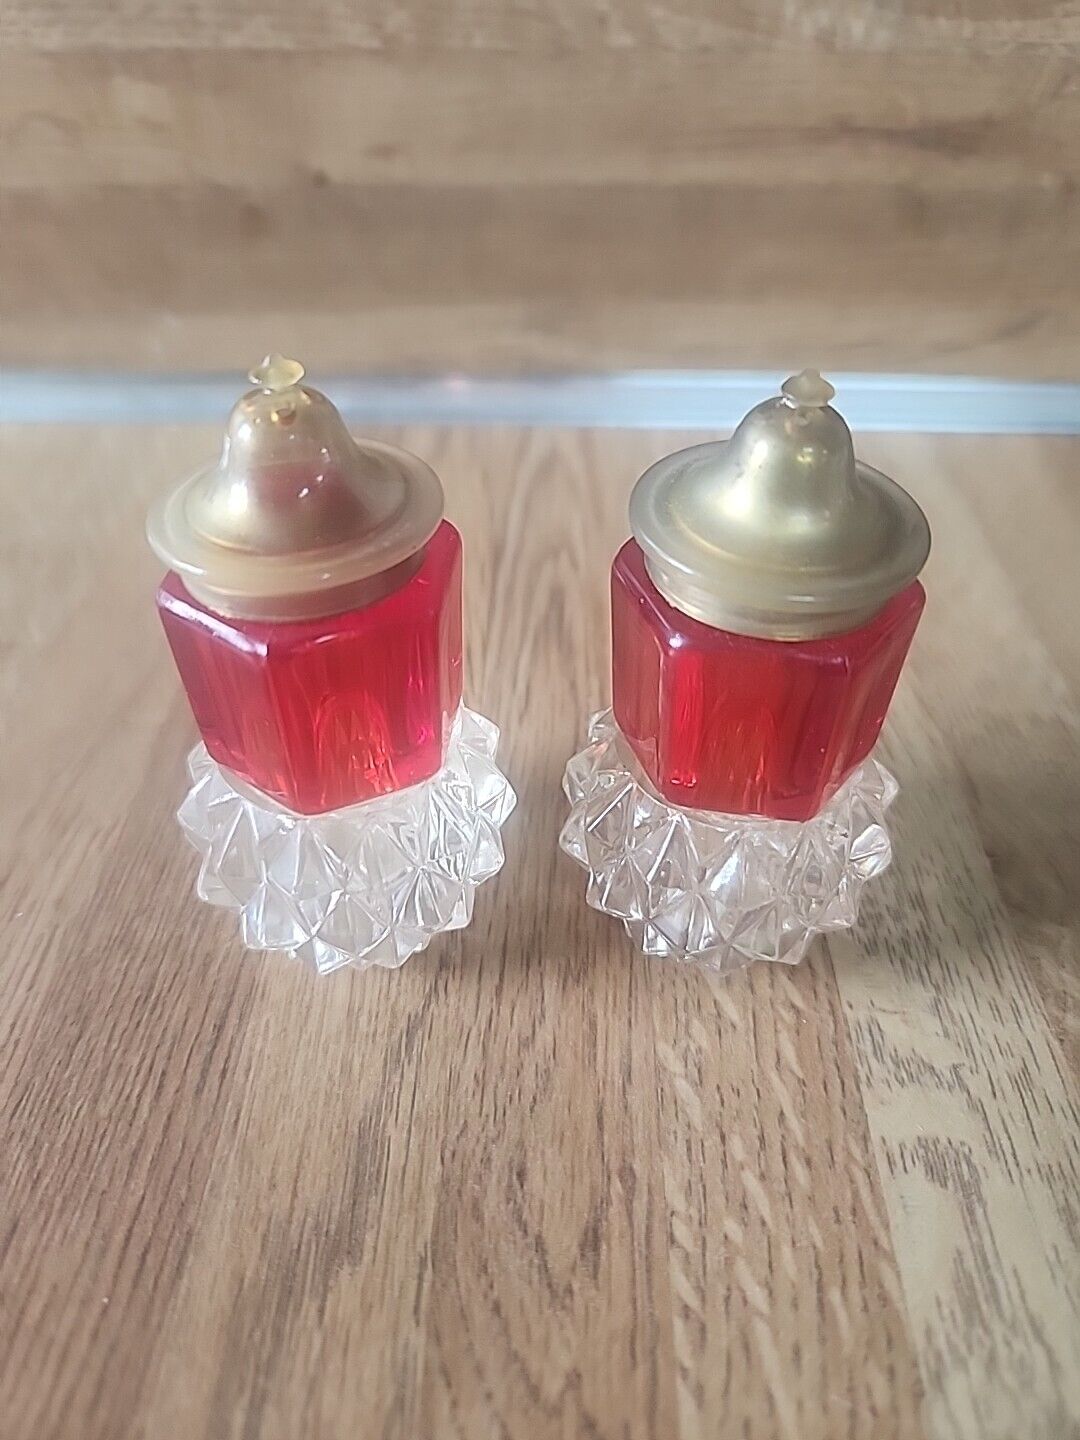 Vintage Salt and Pepper Shakers Plastic Glass Looking Silver Tone Clear Red 